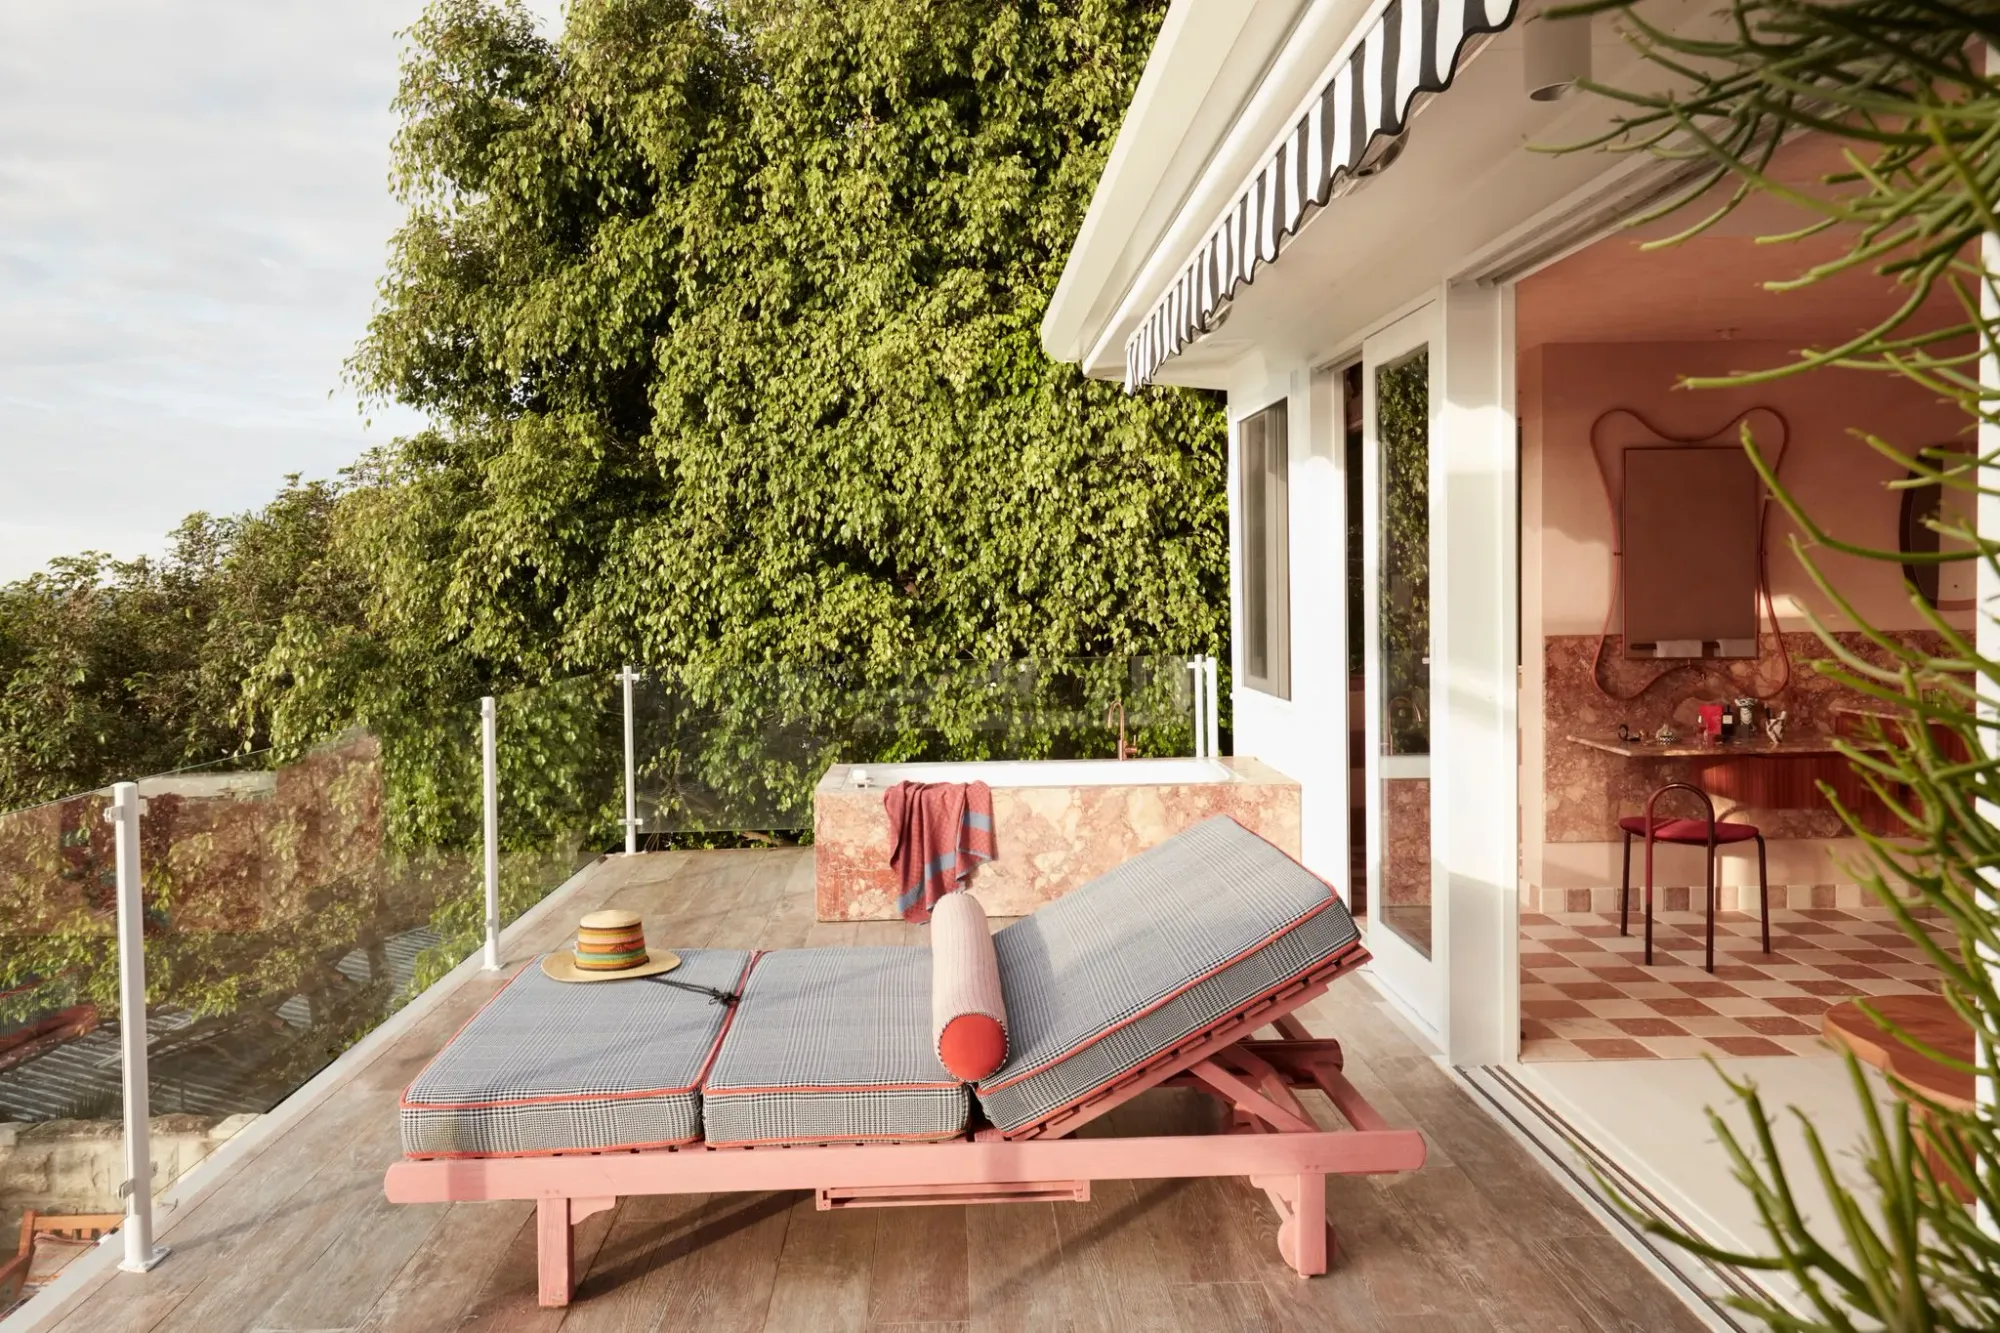 La Palma by YSG Studio. Outdoor sunbed positioned on outdoor decking